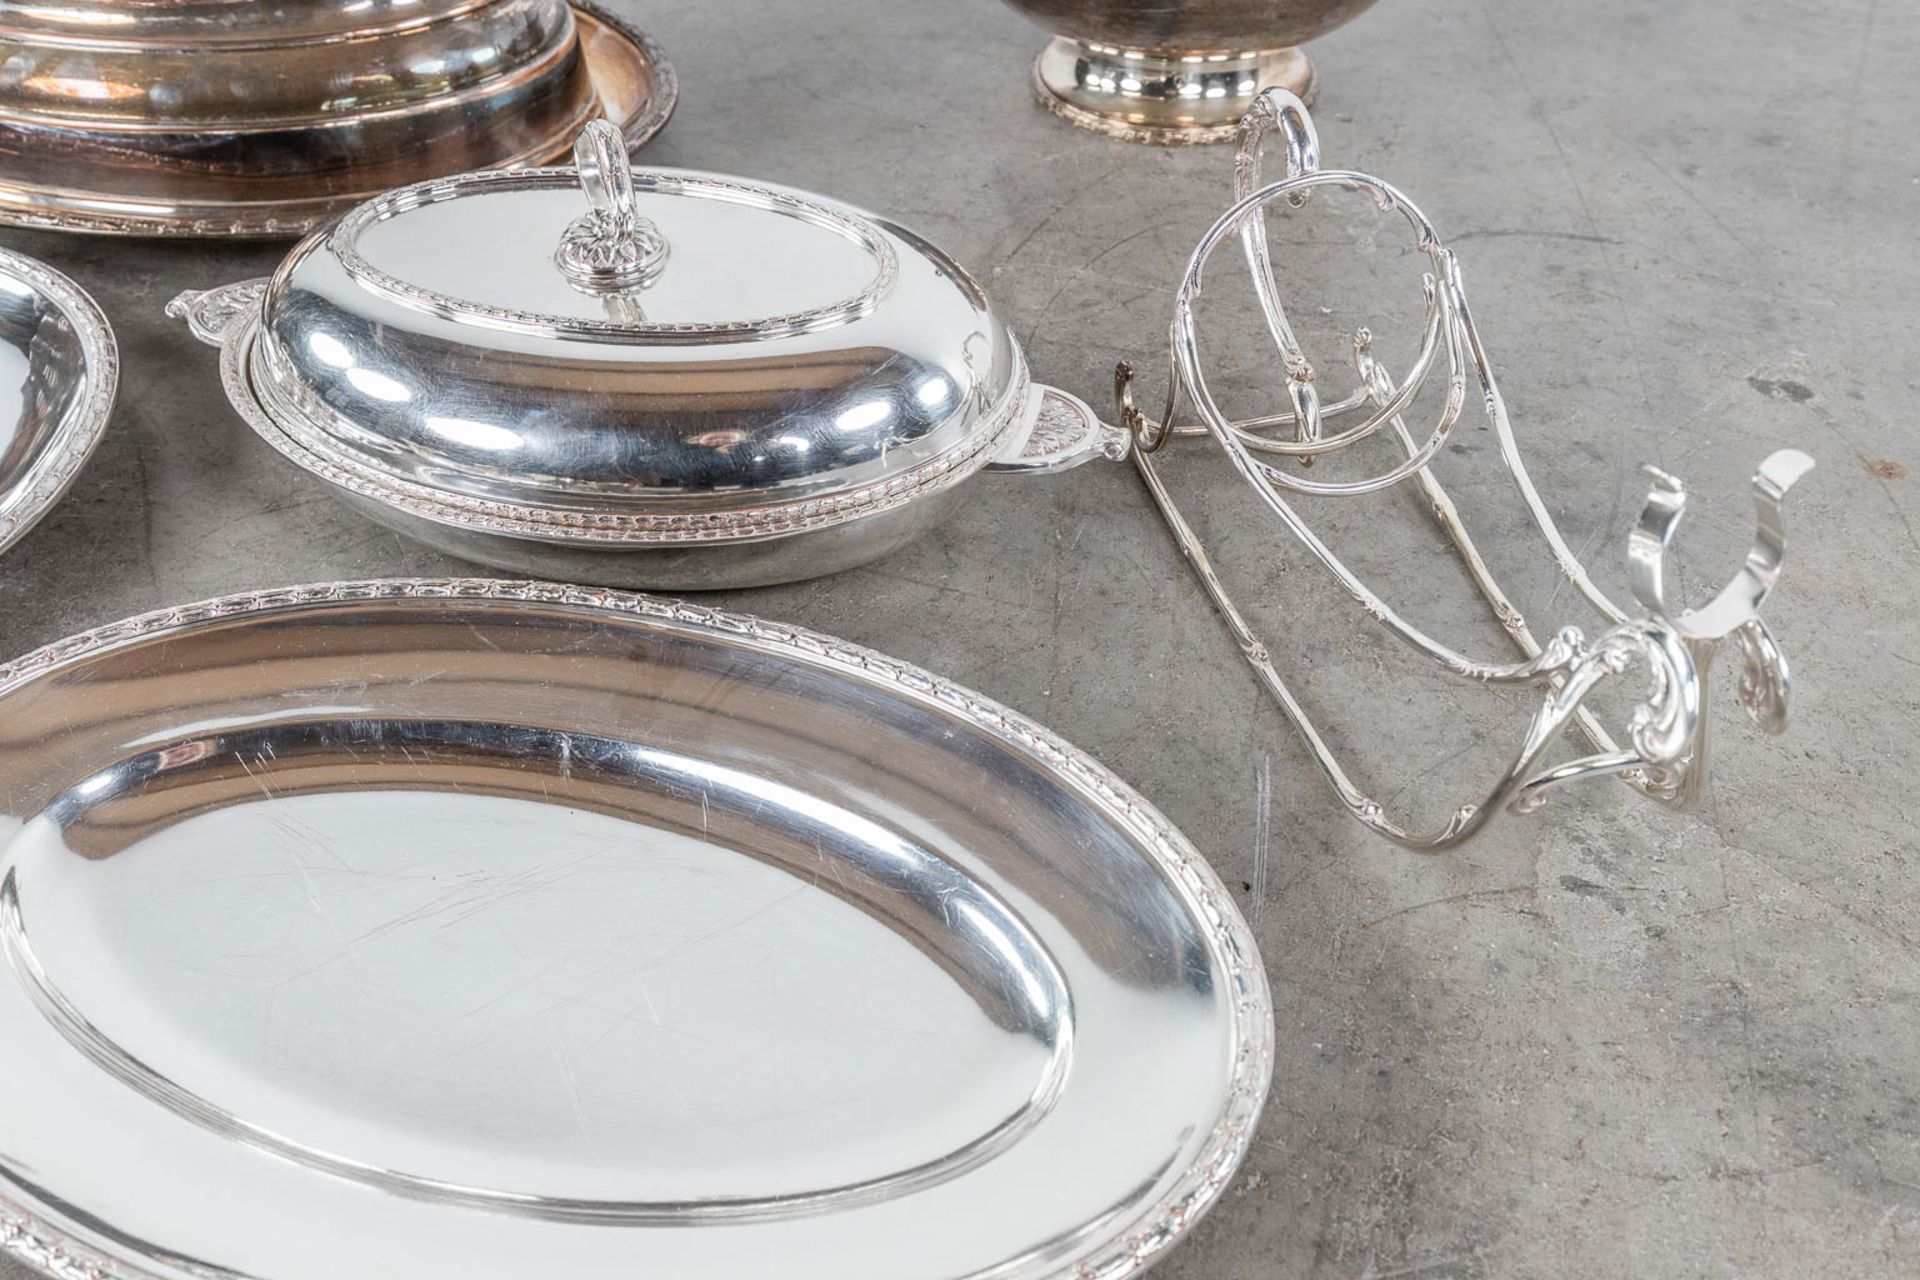 A large collection of table accessories and serving ware, silver-plated metal. (L: 32 x W: 48 cm) - Image 9 of 10